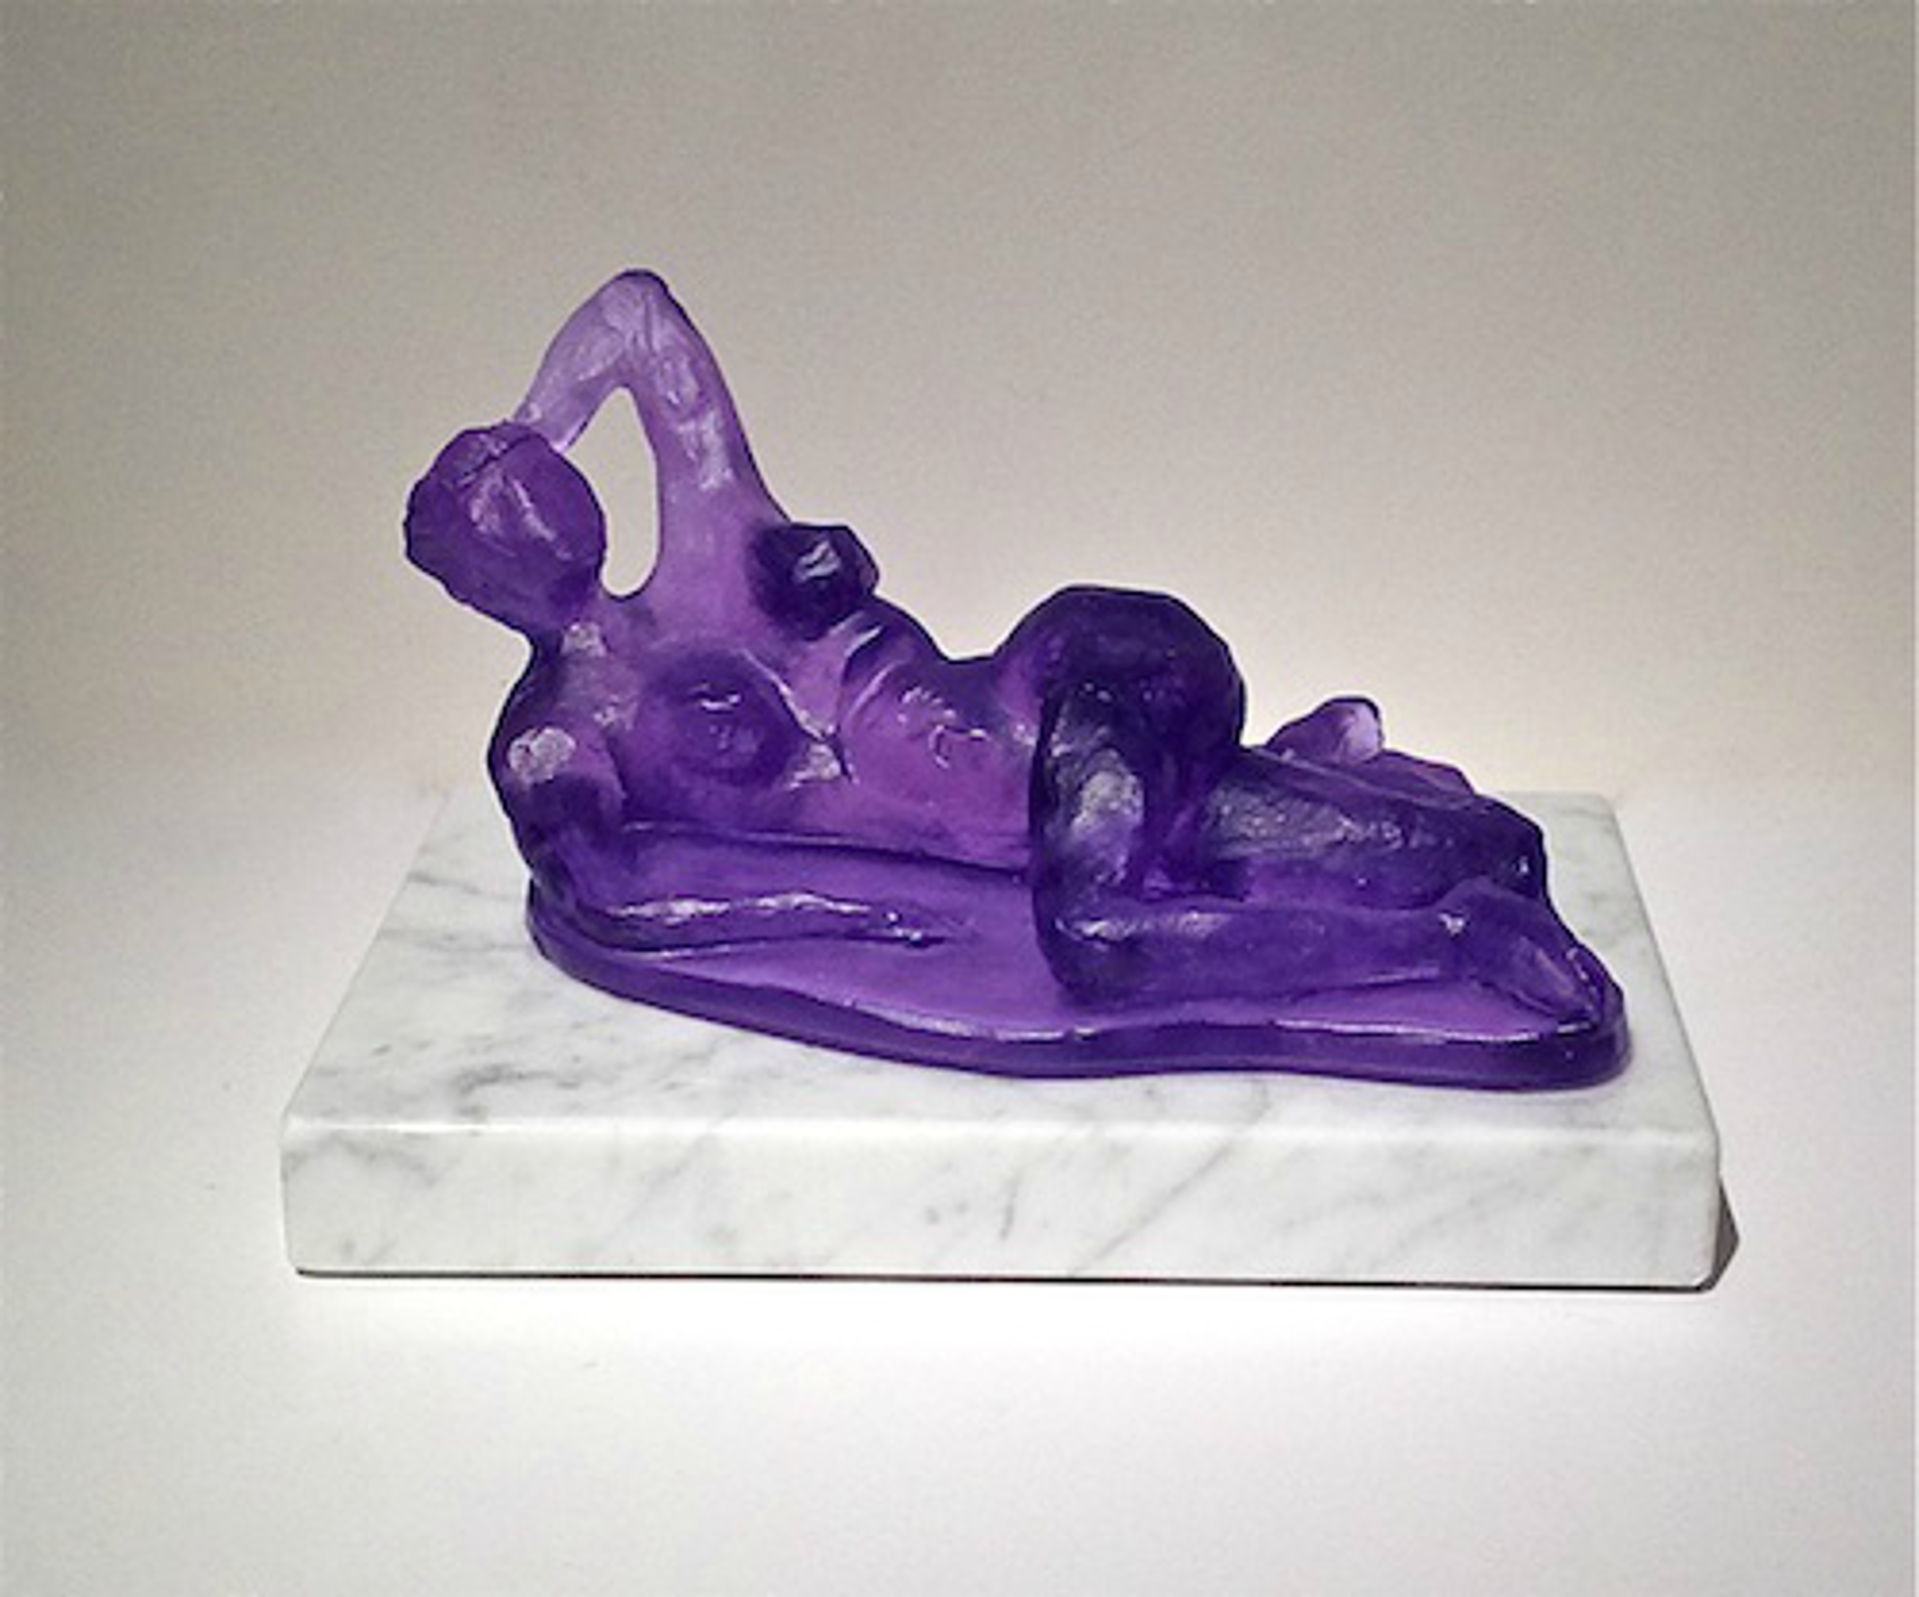 Woman Reclining (Purple) by Michael Young